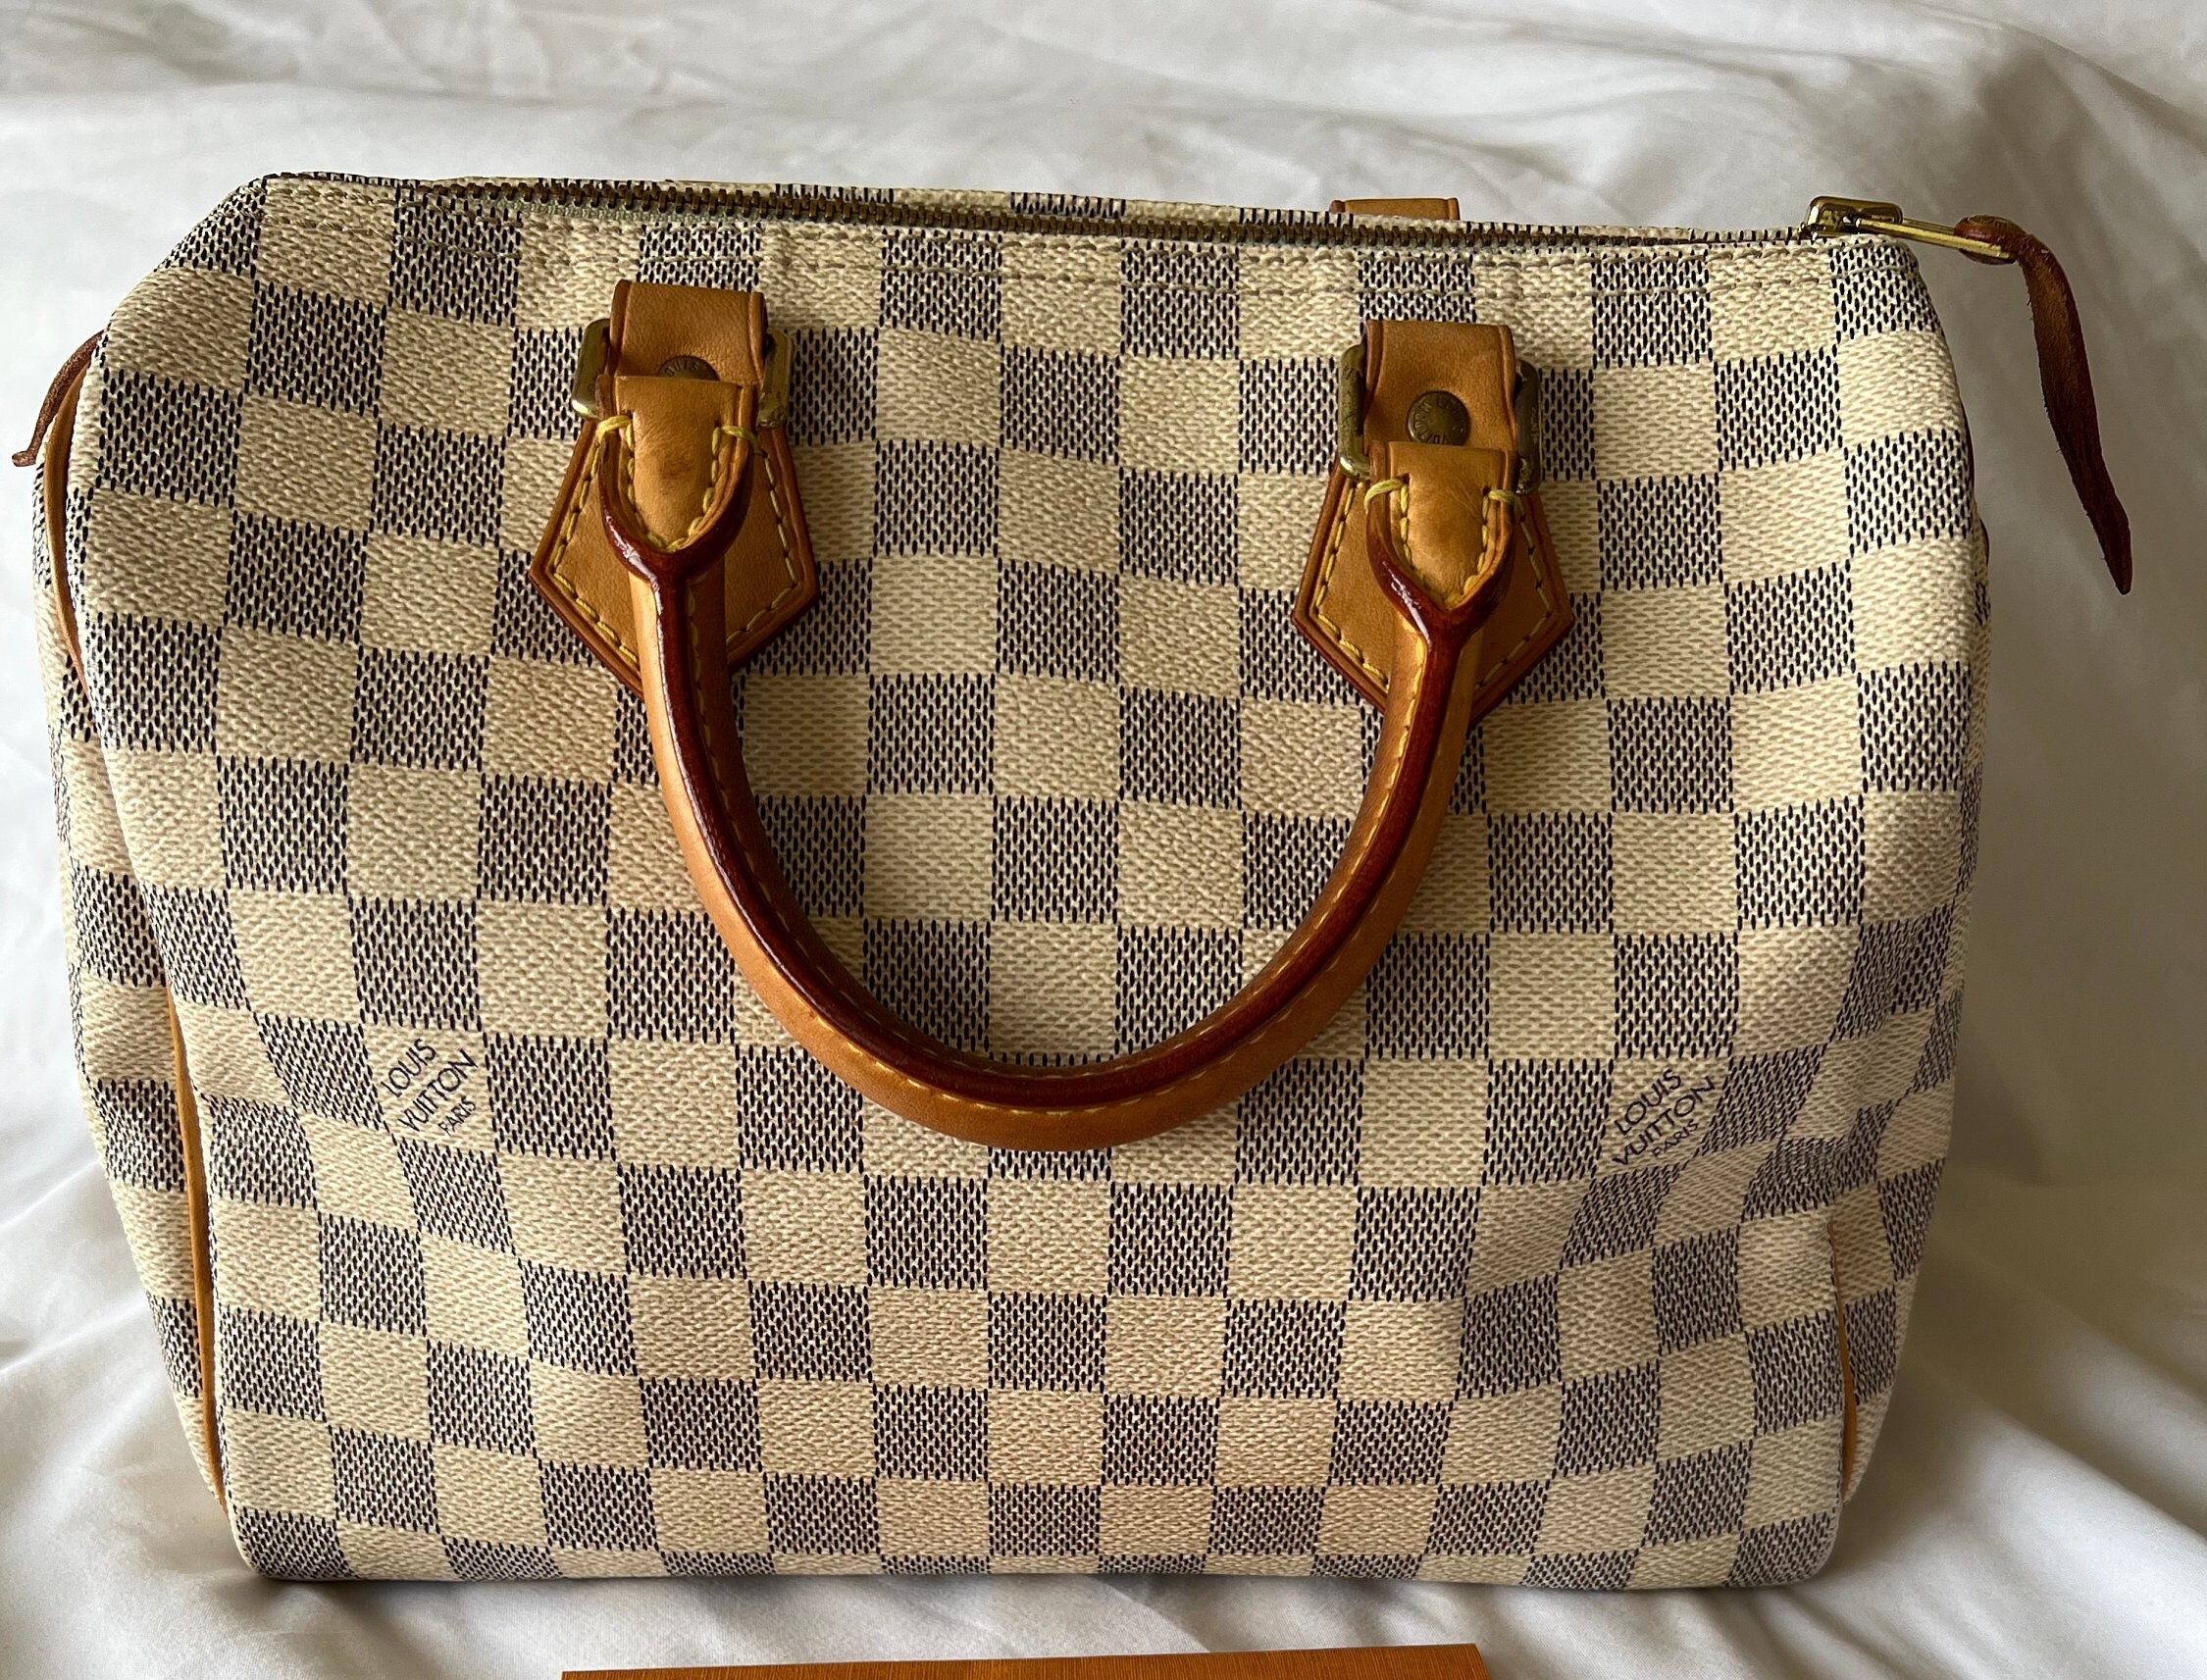 Louis Vuitton vintage and upcycled boho bags, purses, keychains